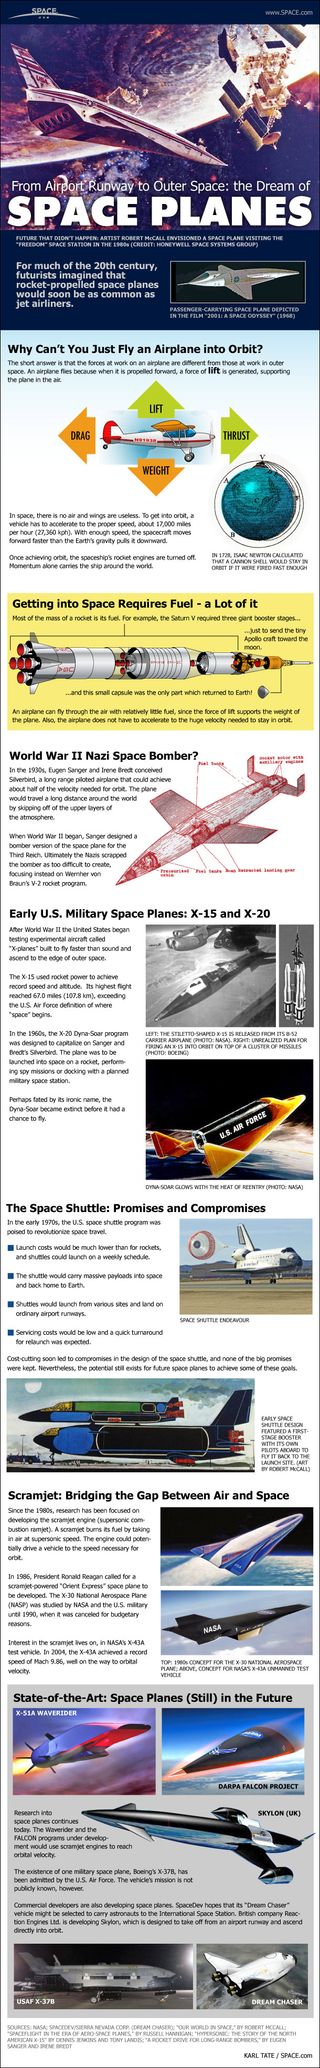 Space planes have long been a staple of science fiction, but became reality with the advent of NASA's space shuttle. See how engineers turned the dream of winged spaceship into reality with NASA's space shuttle in this Space.com infographic.